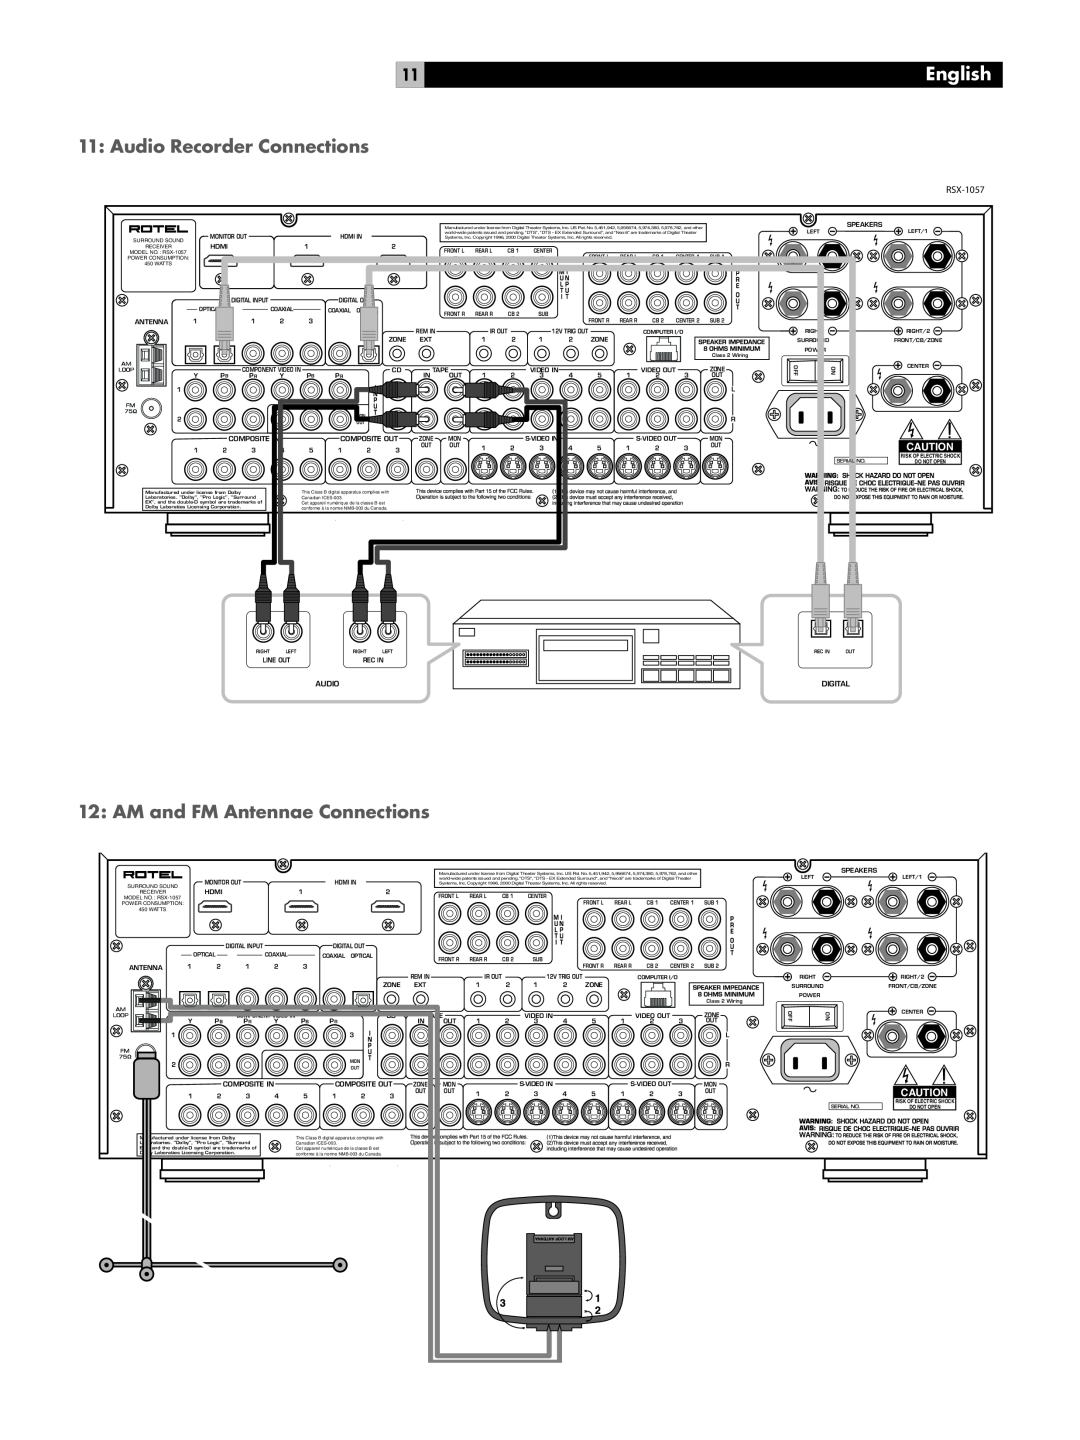 Rotel RSX-1057 owner manual 11: Audio Recorder Connections, 12: AM and FM Antennae Connections, English 